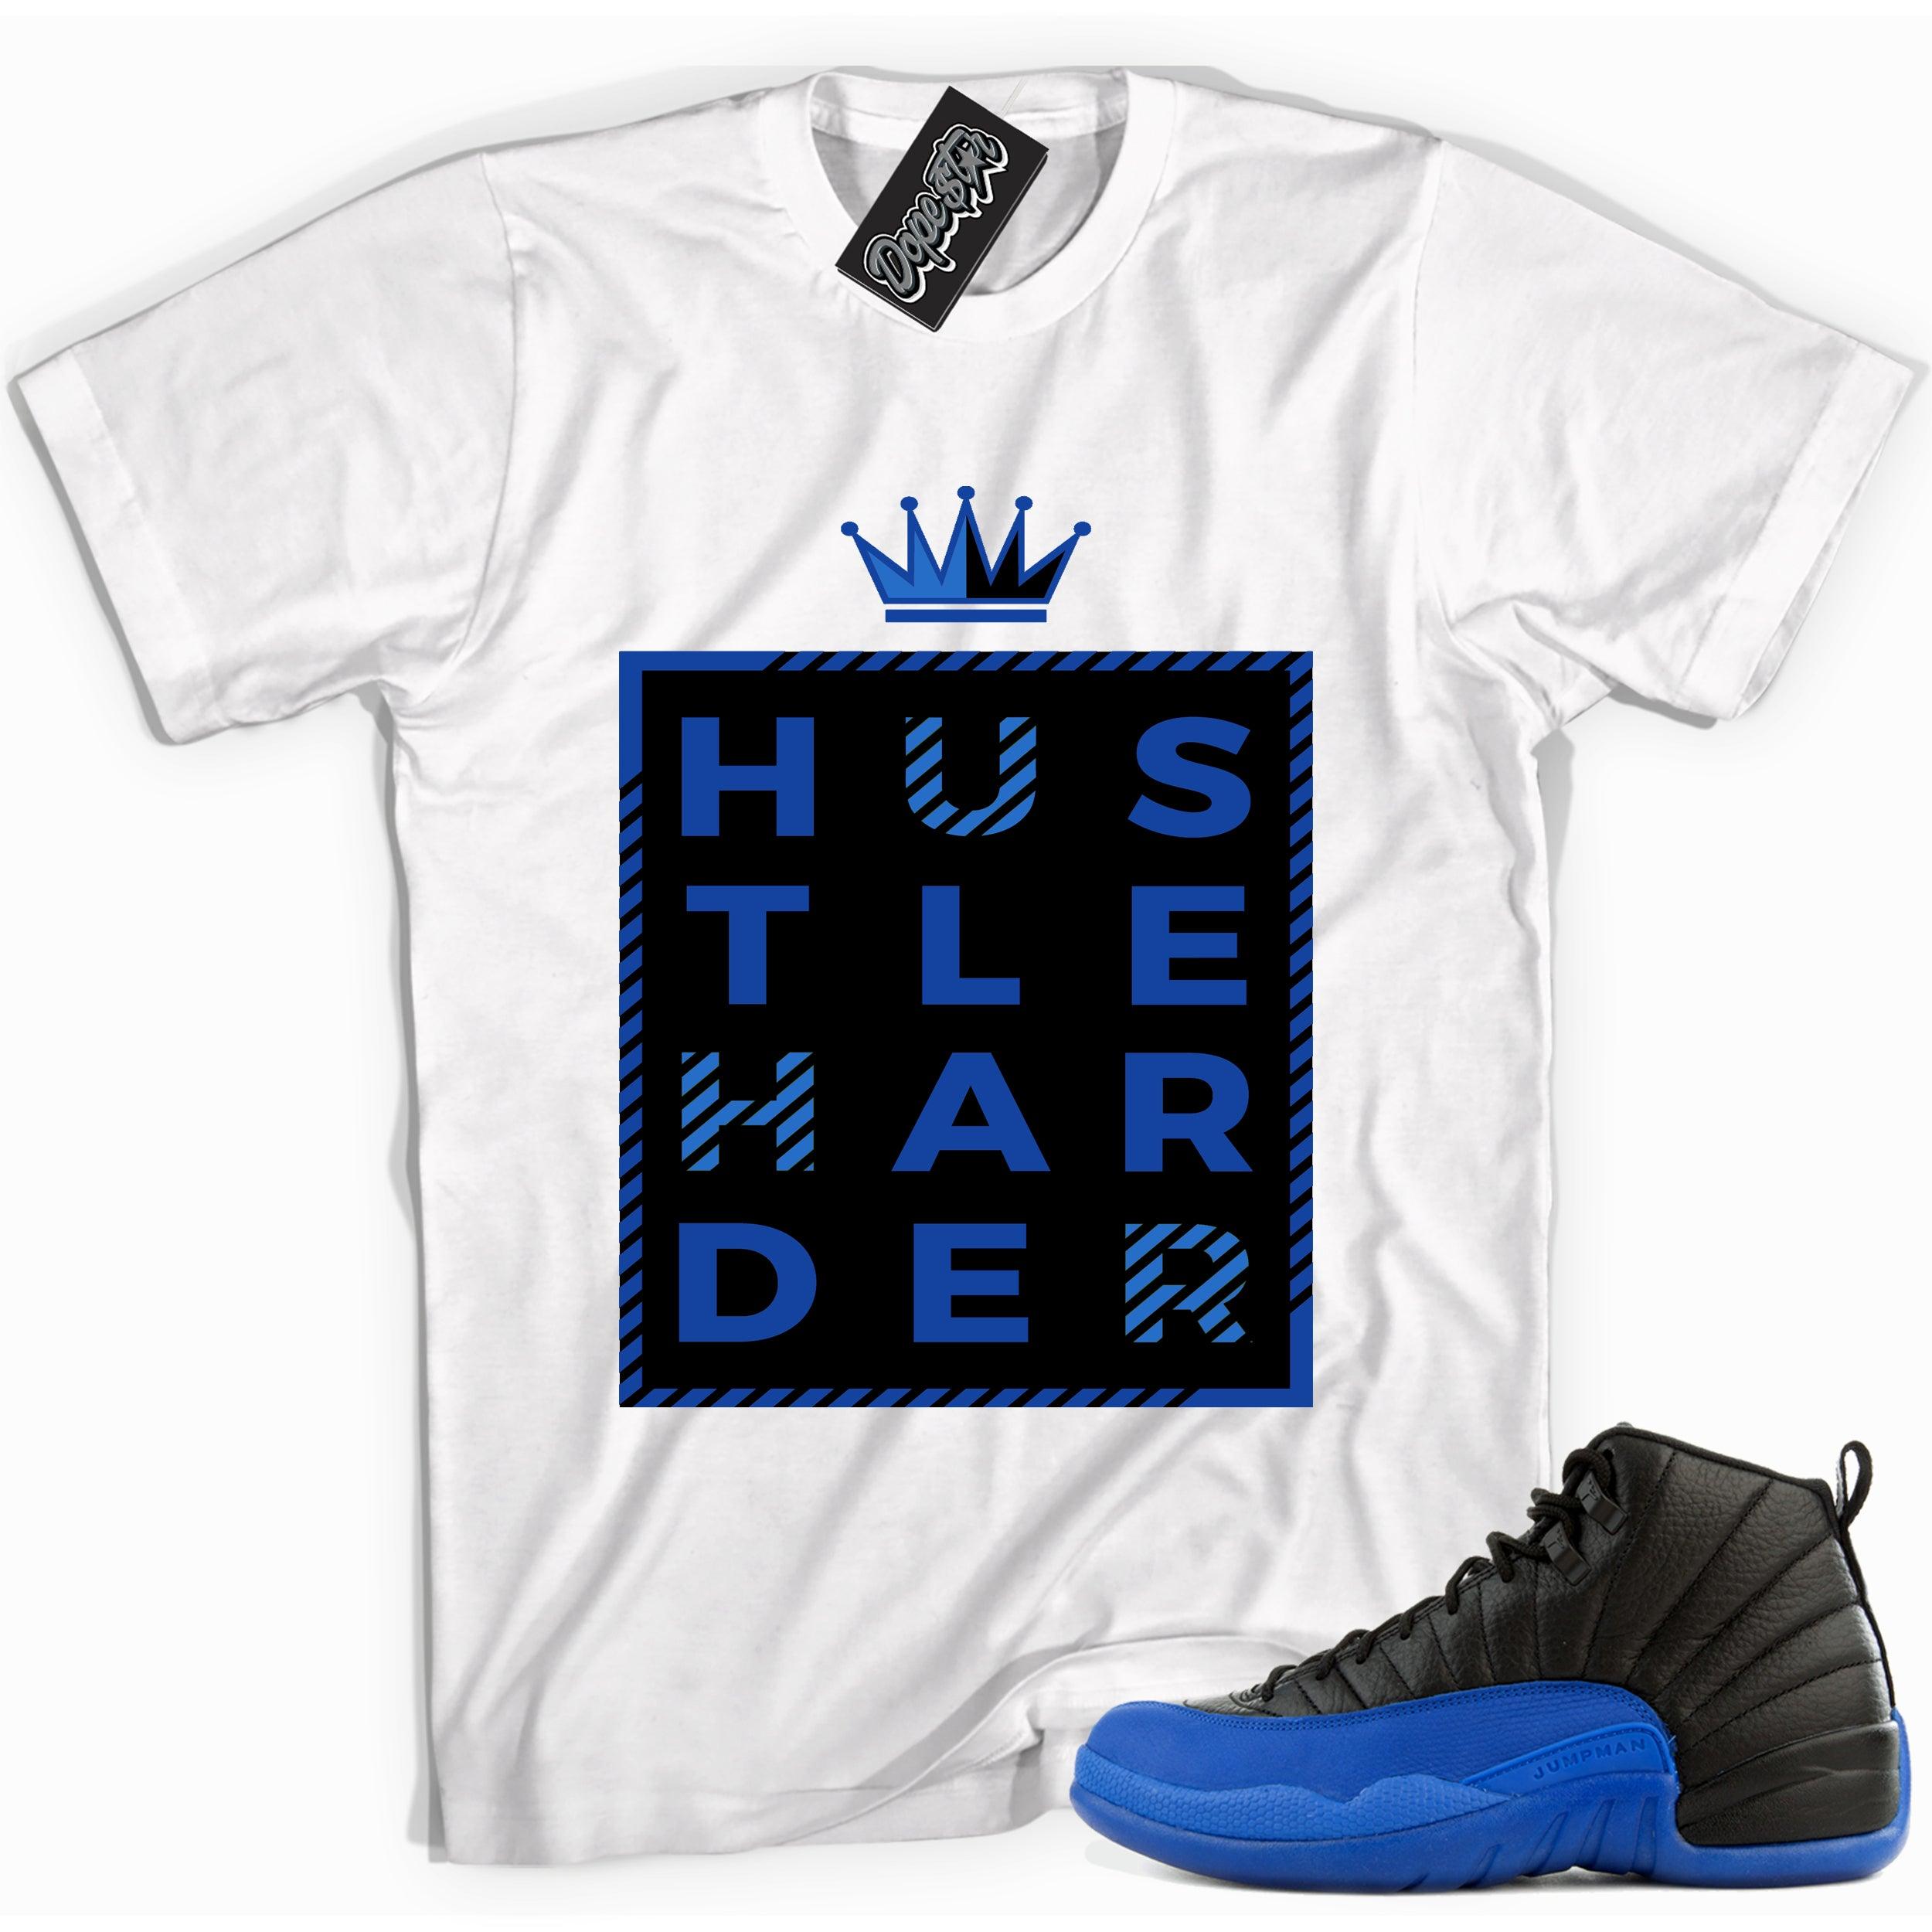 Cool white graphic tee with 'hustle harder' print, that perfectly matches Air Jordan 12 Retro Black Game Royal sneakers.